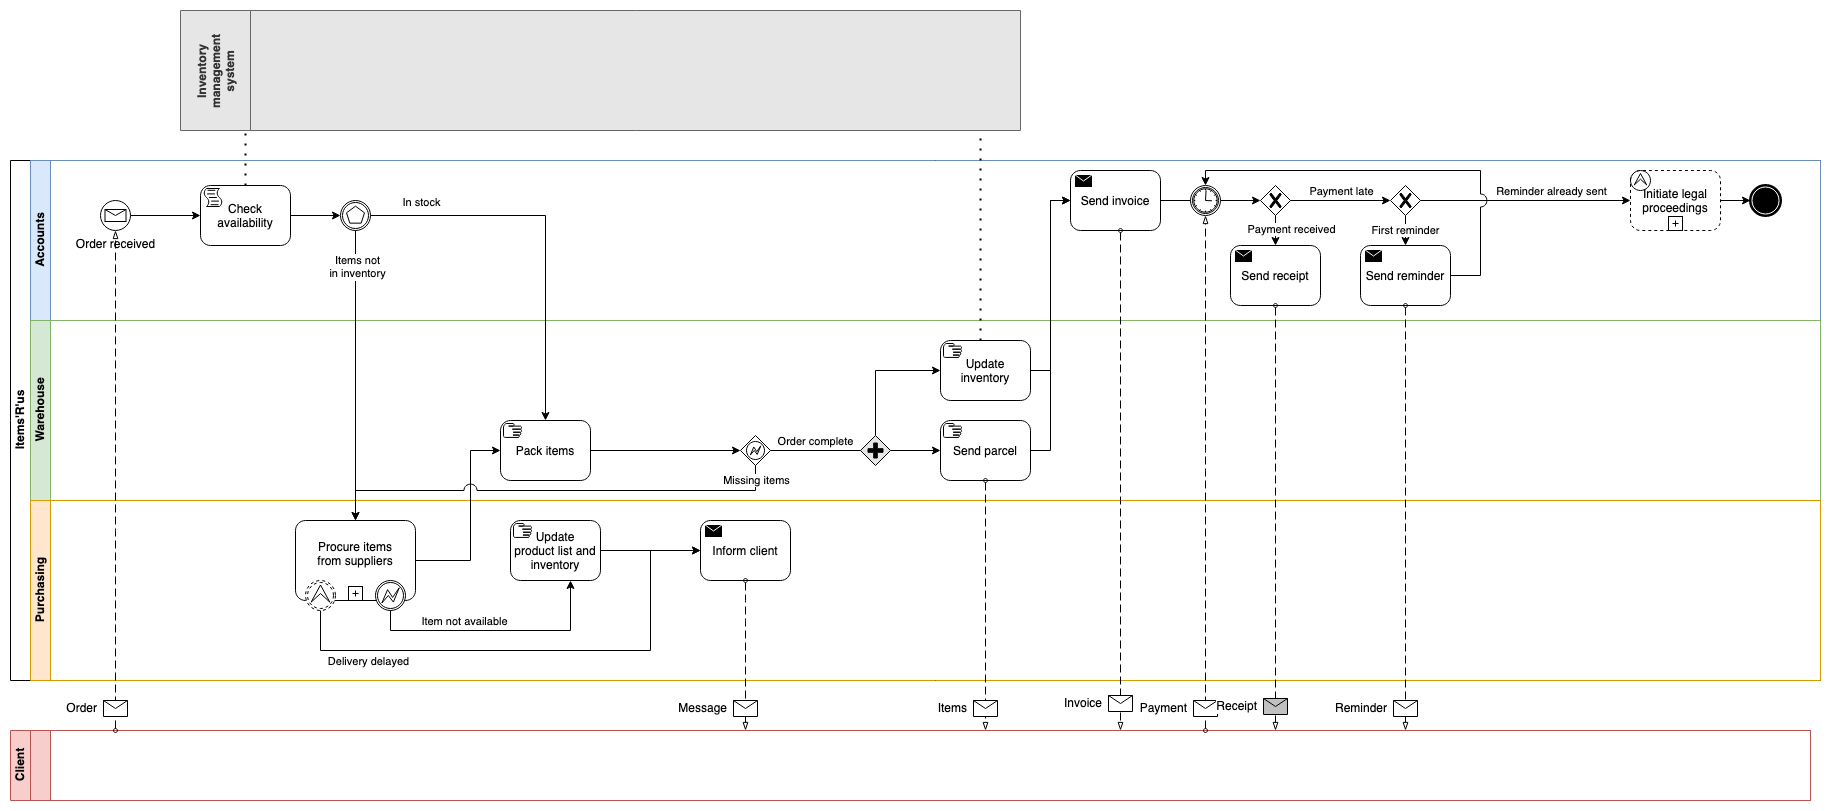 An example BPMN diagram that details the steps involved in processing an order